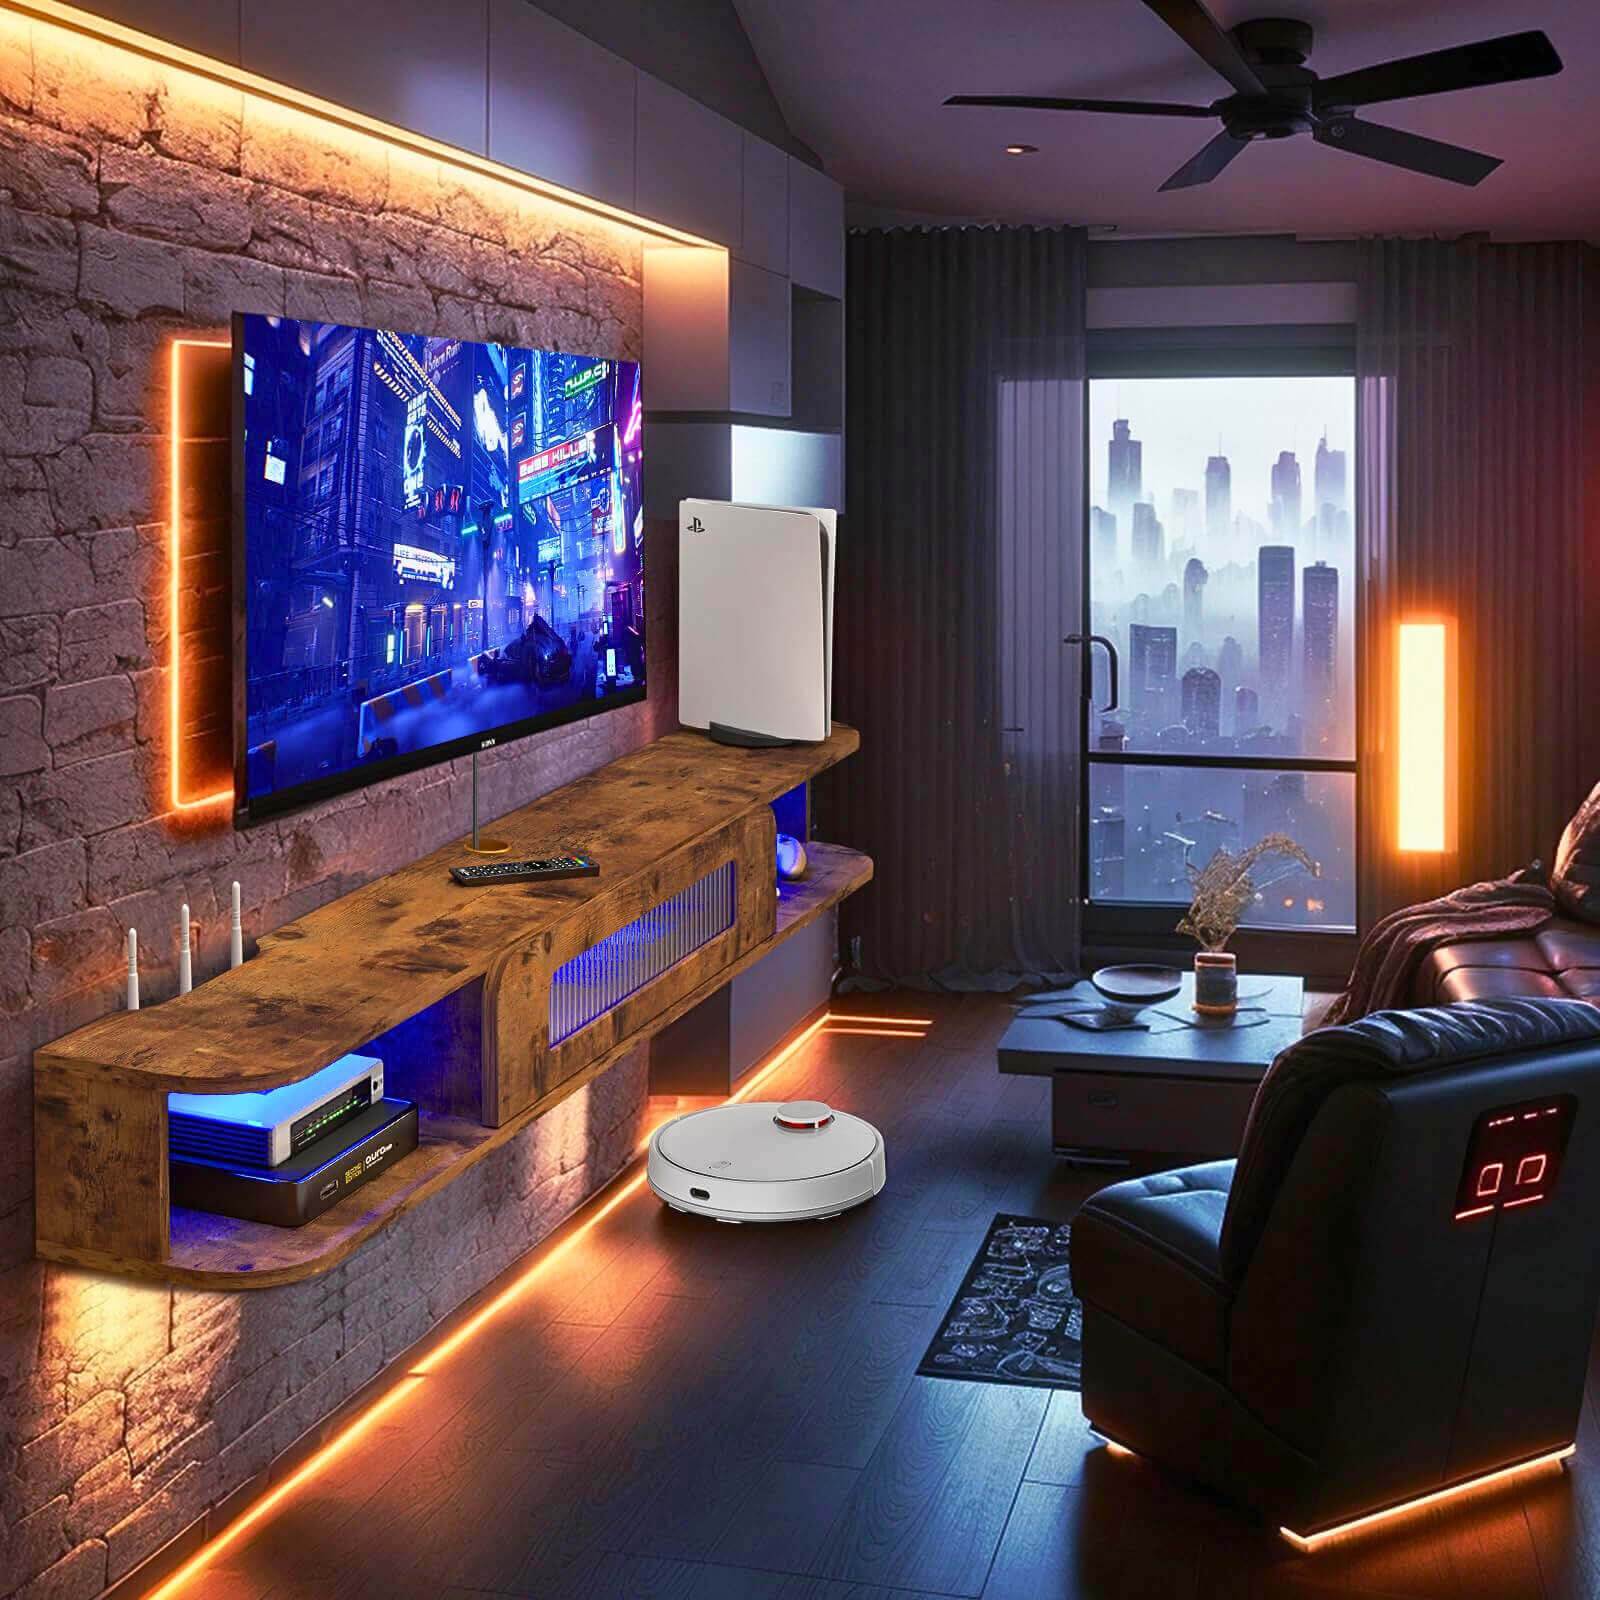 Custom Wood Floating TV Stand Wall Shelf with LED Lights and Glass Door